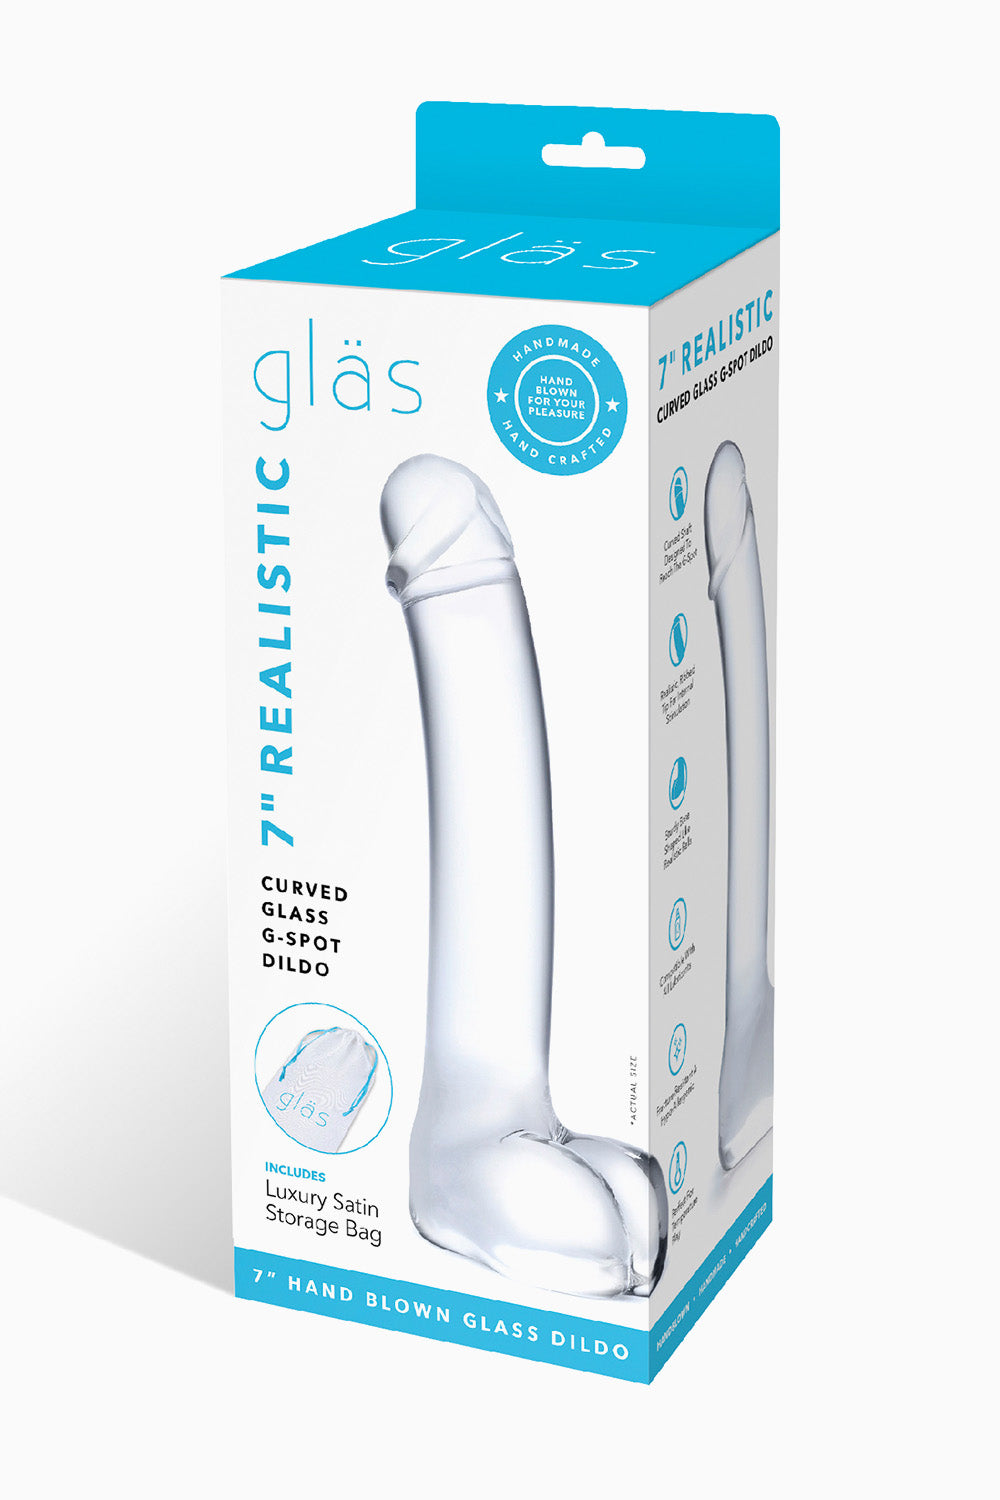 Glas Realistic Curved Glass G-Spot Dildo, 7 Inches